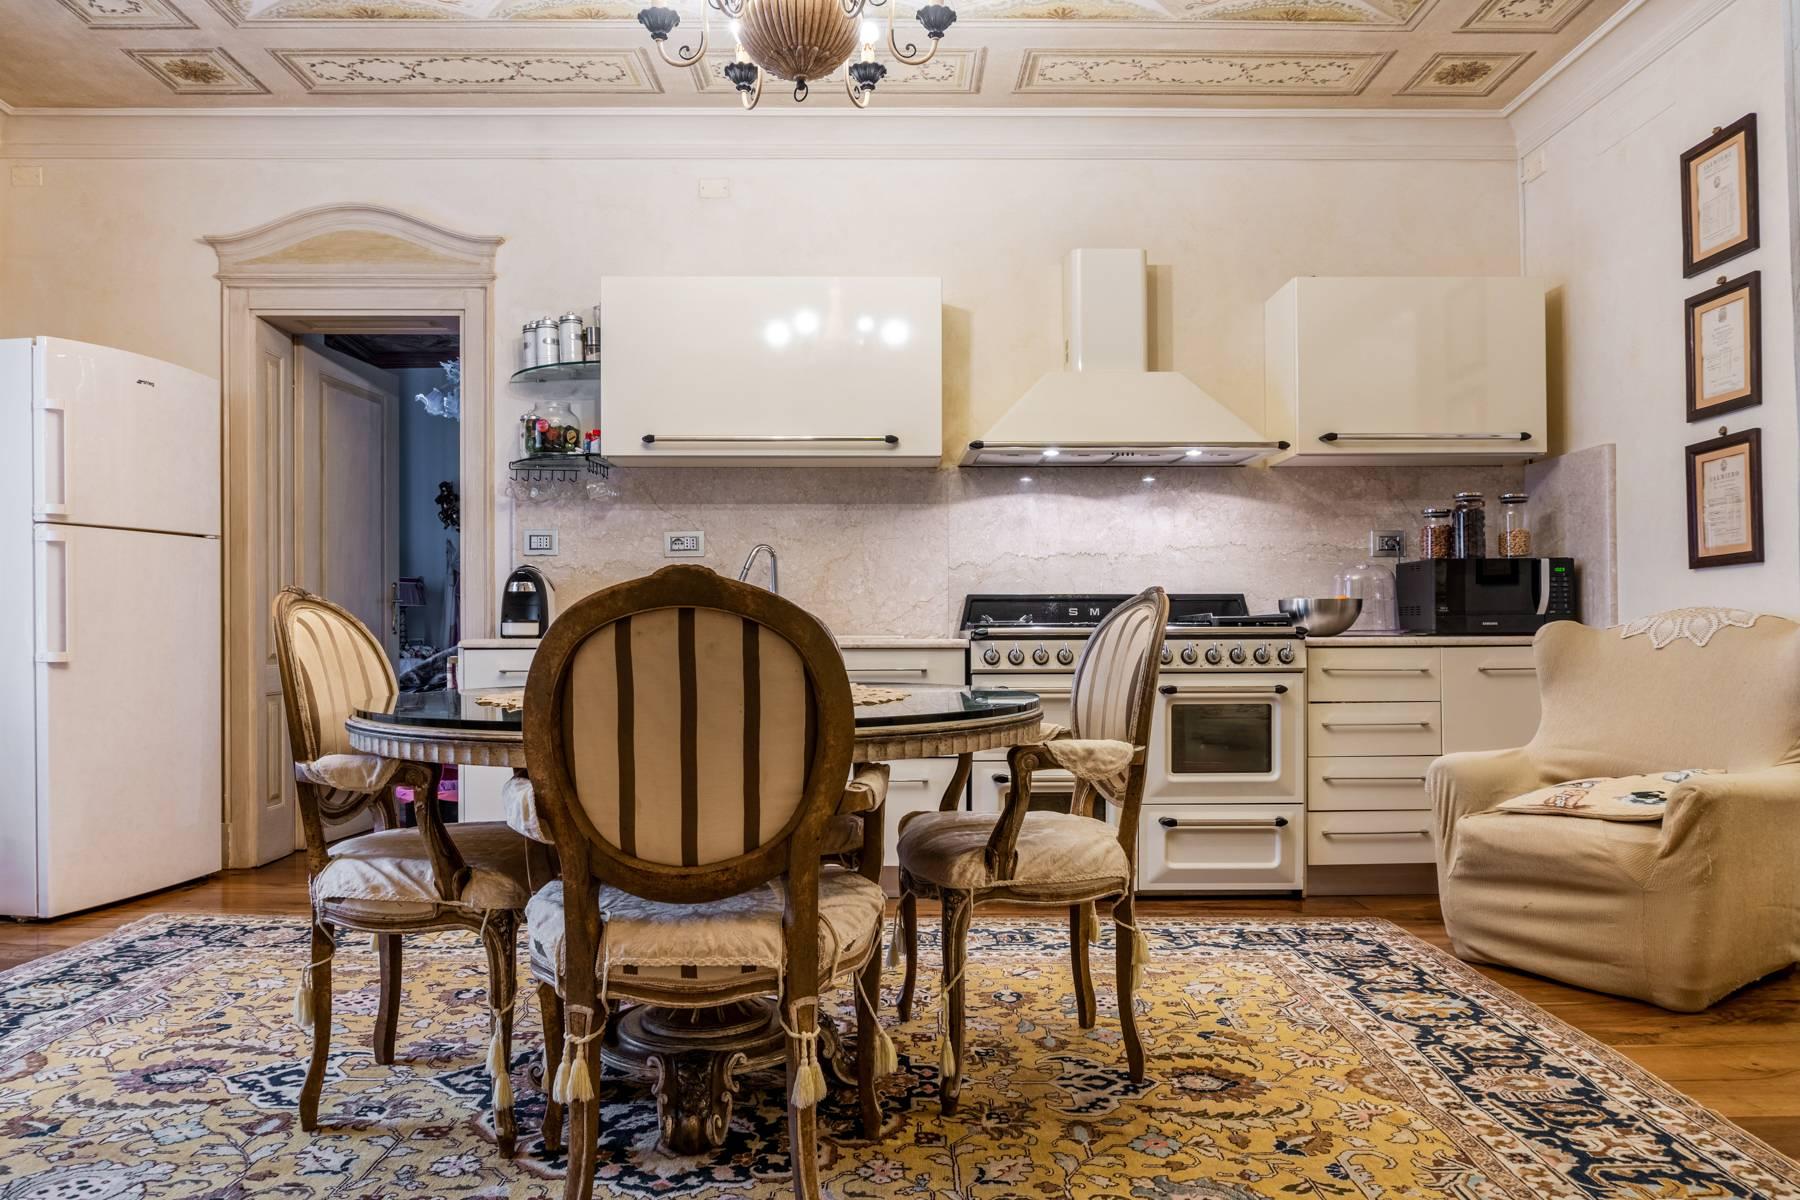 Historic residence dating back to the XVI Century, completely renovated - 14